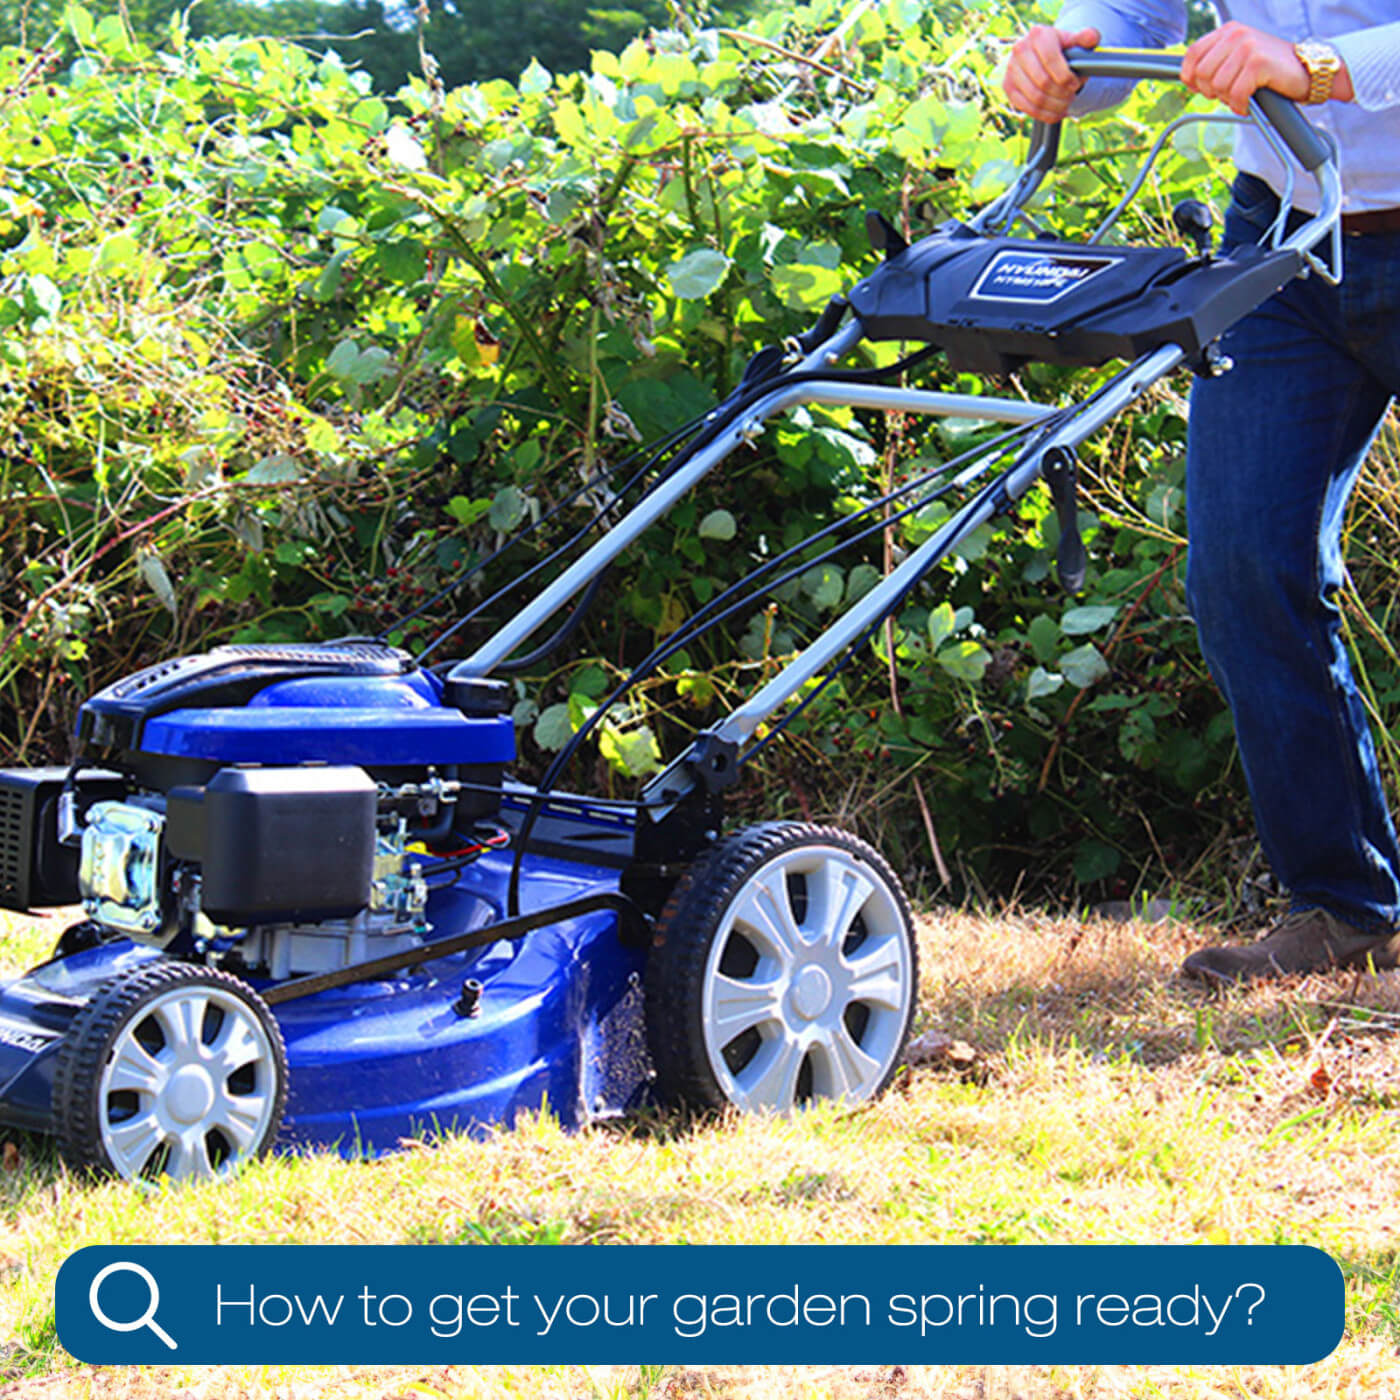 10 tips - How to get your garden ready for Spring / Summer 2023